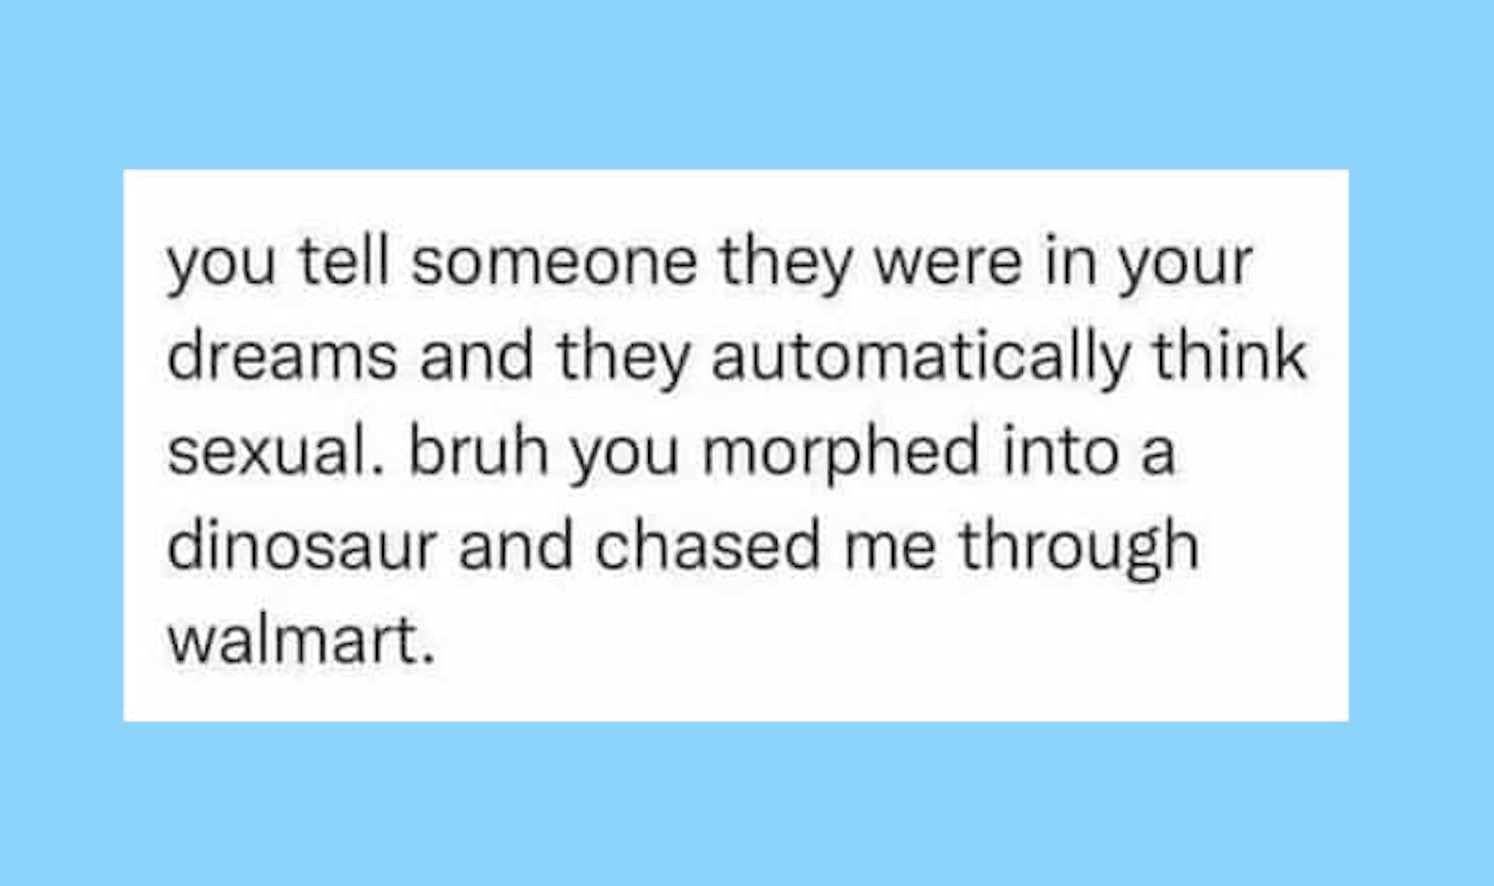 you tell someone they were in your dreams and they automatically think sexual. bruh you morphed into a dinosaur and chased me through walmart.